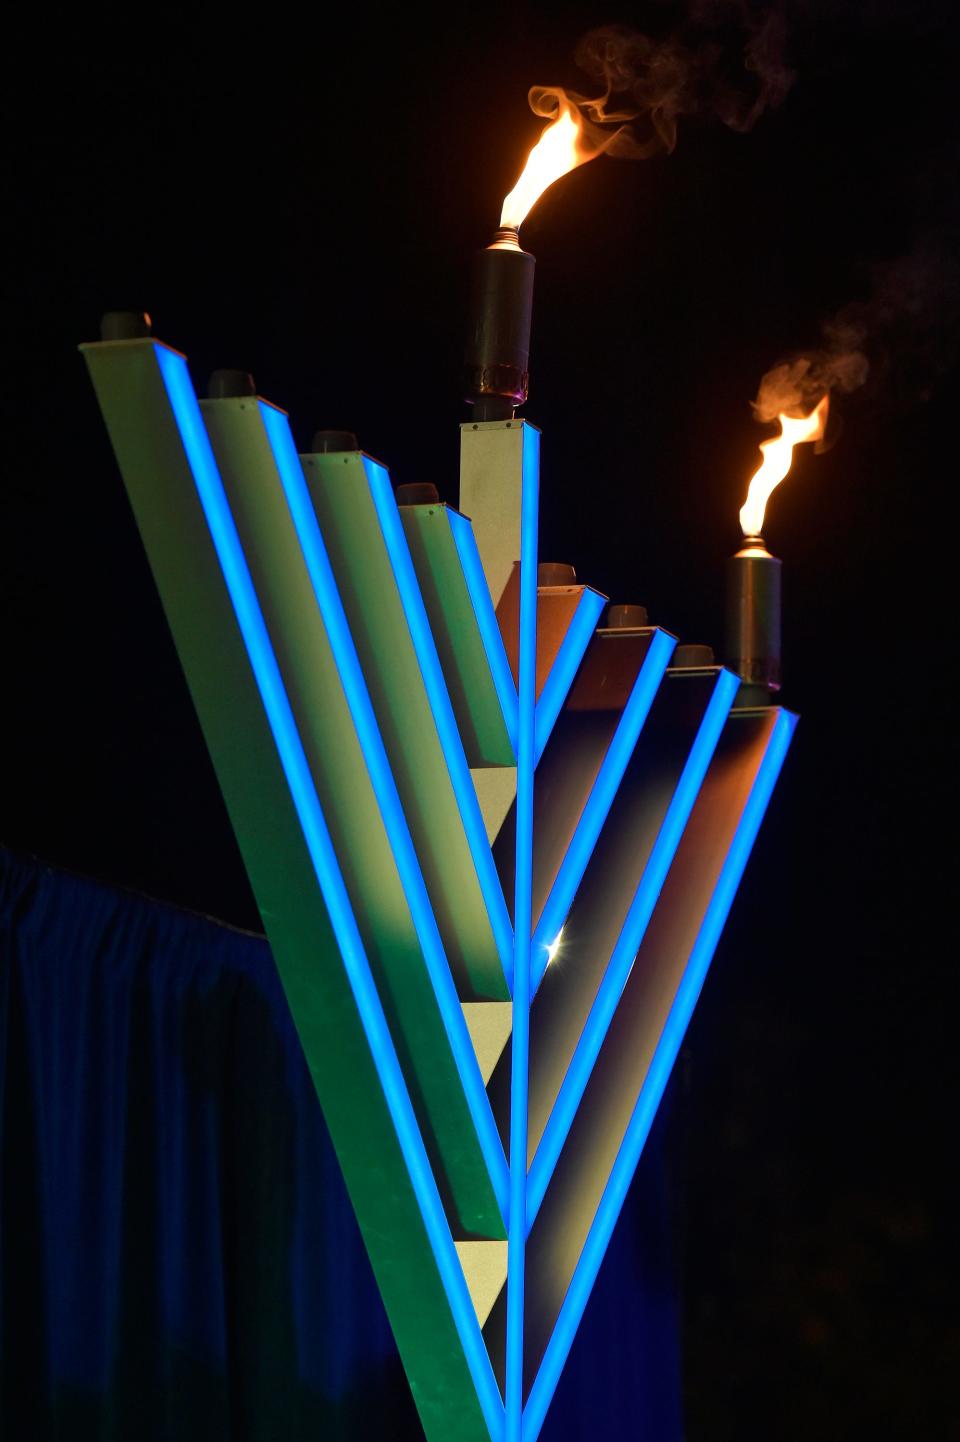 The center candle and the candle representing the first of the 8 nights of Hanukkah flicker atop the menorah.